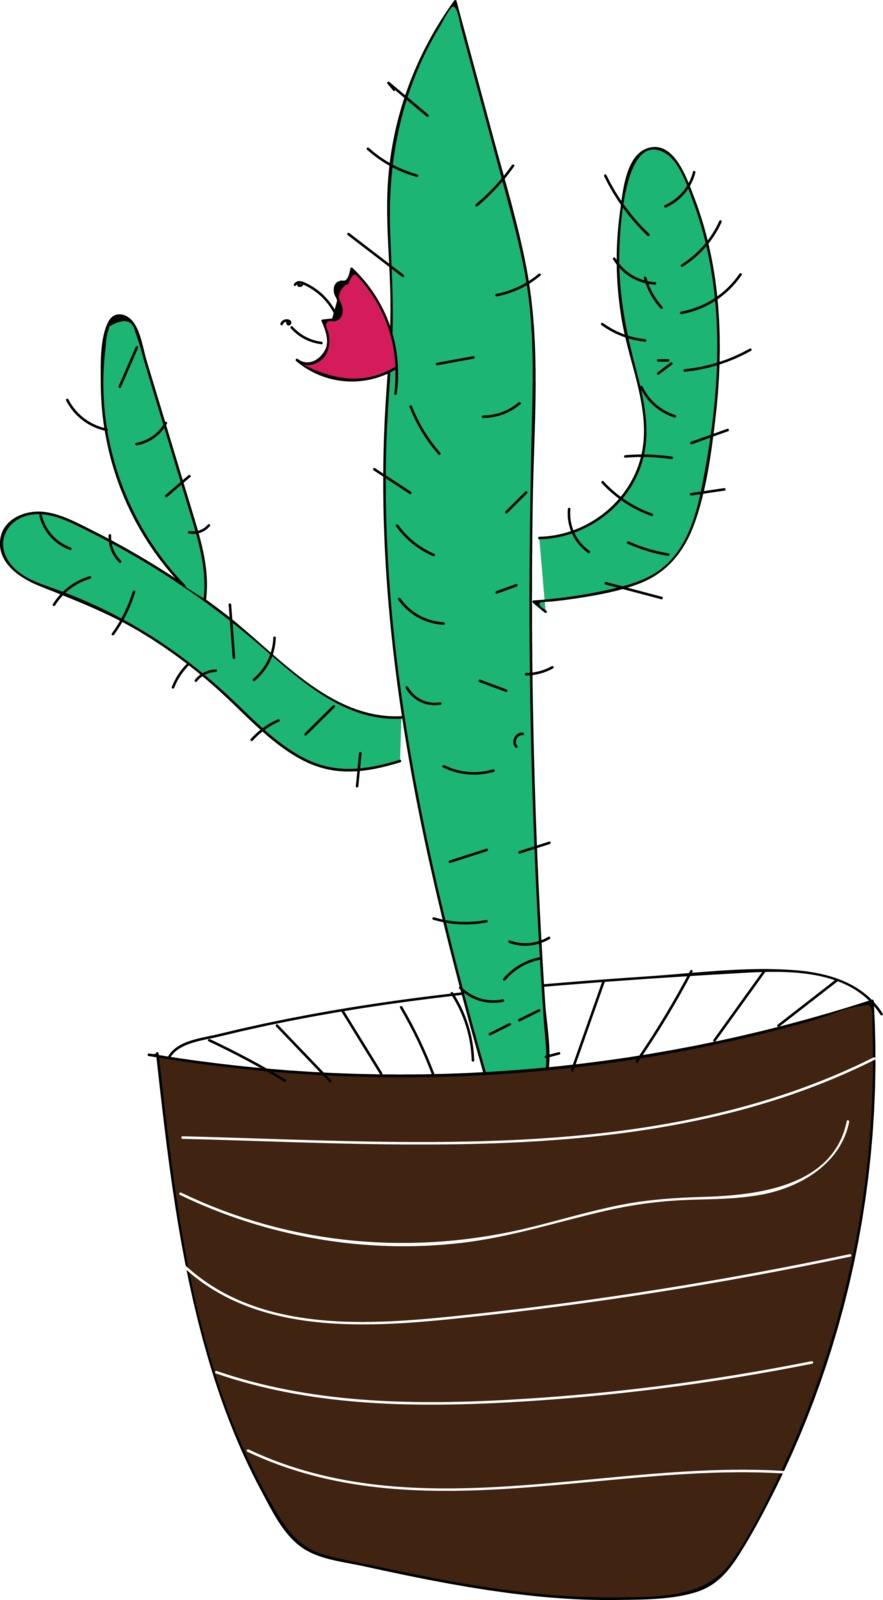 Blossom of a cactus vector illustration 